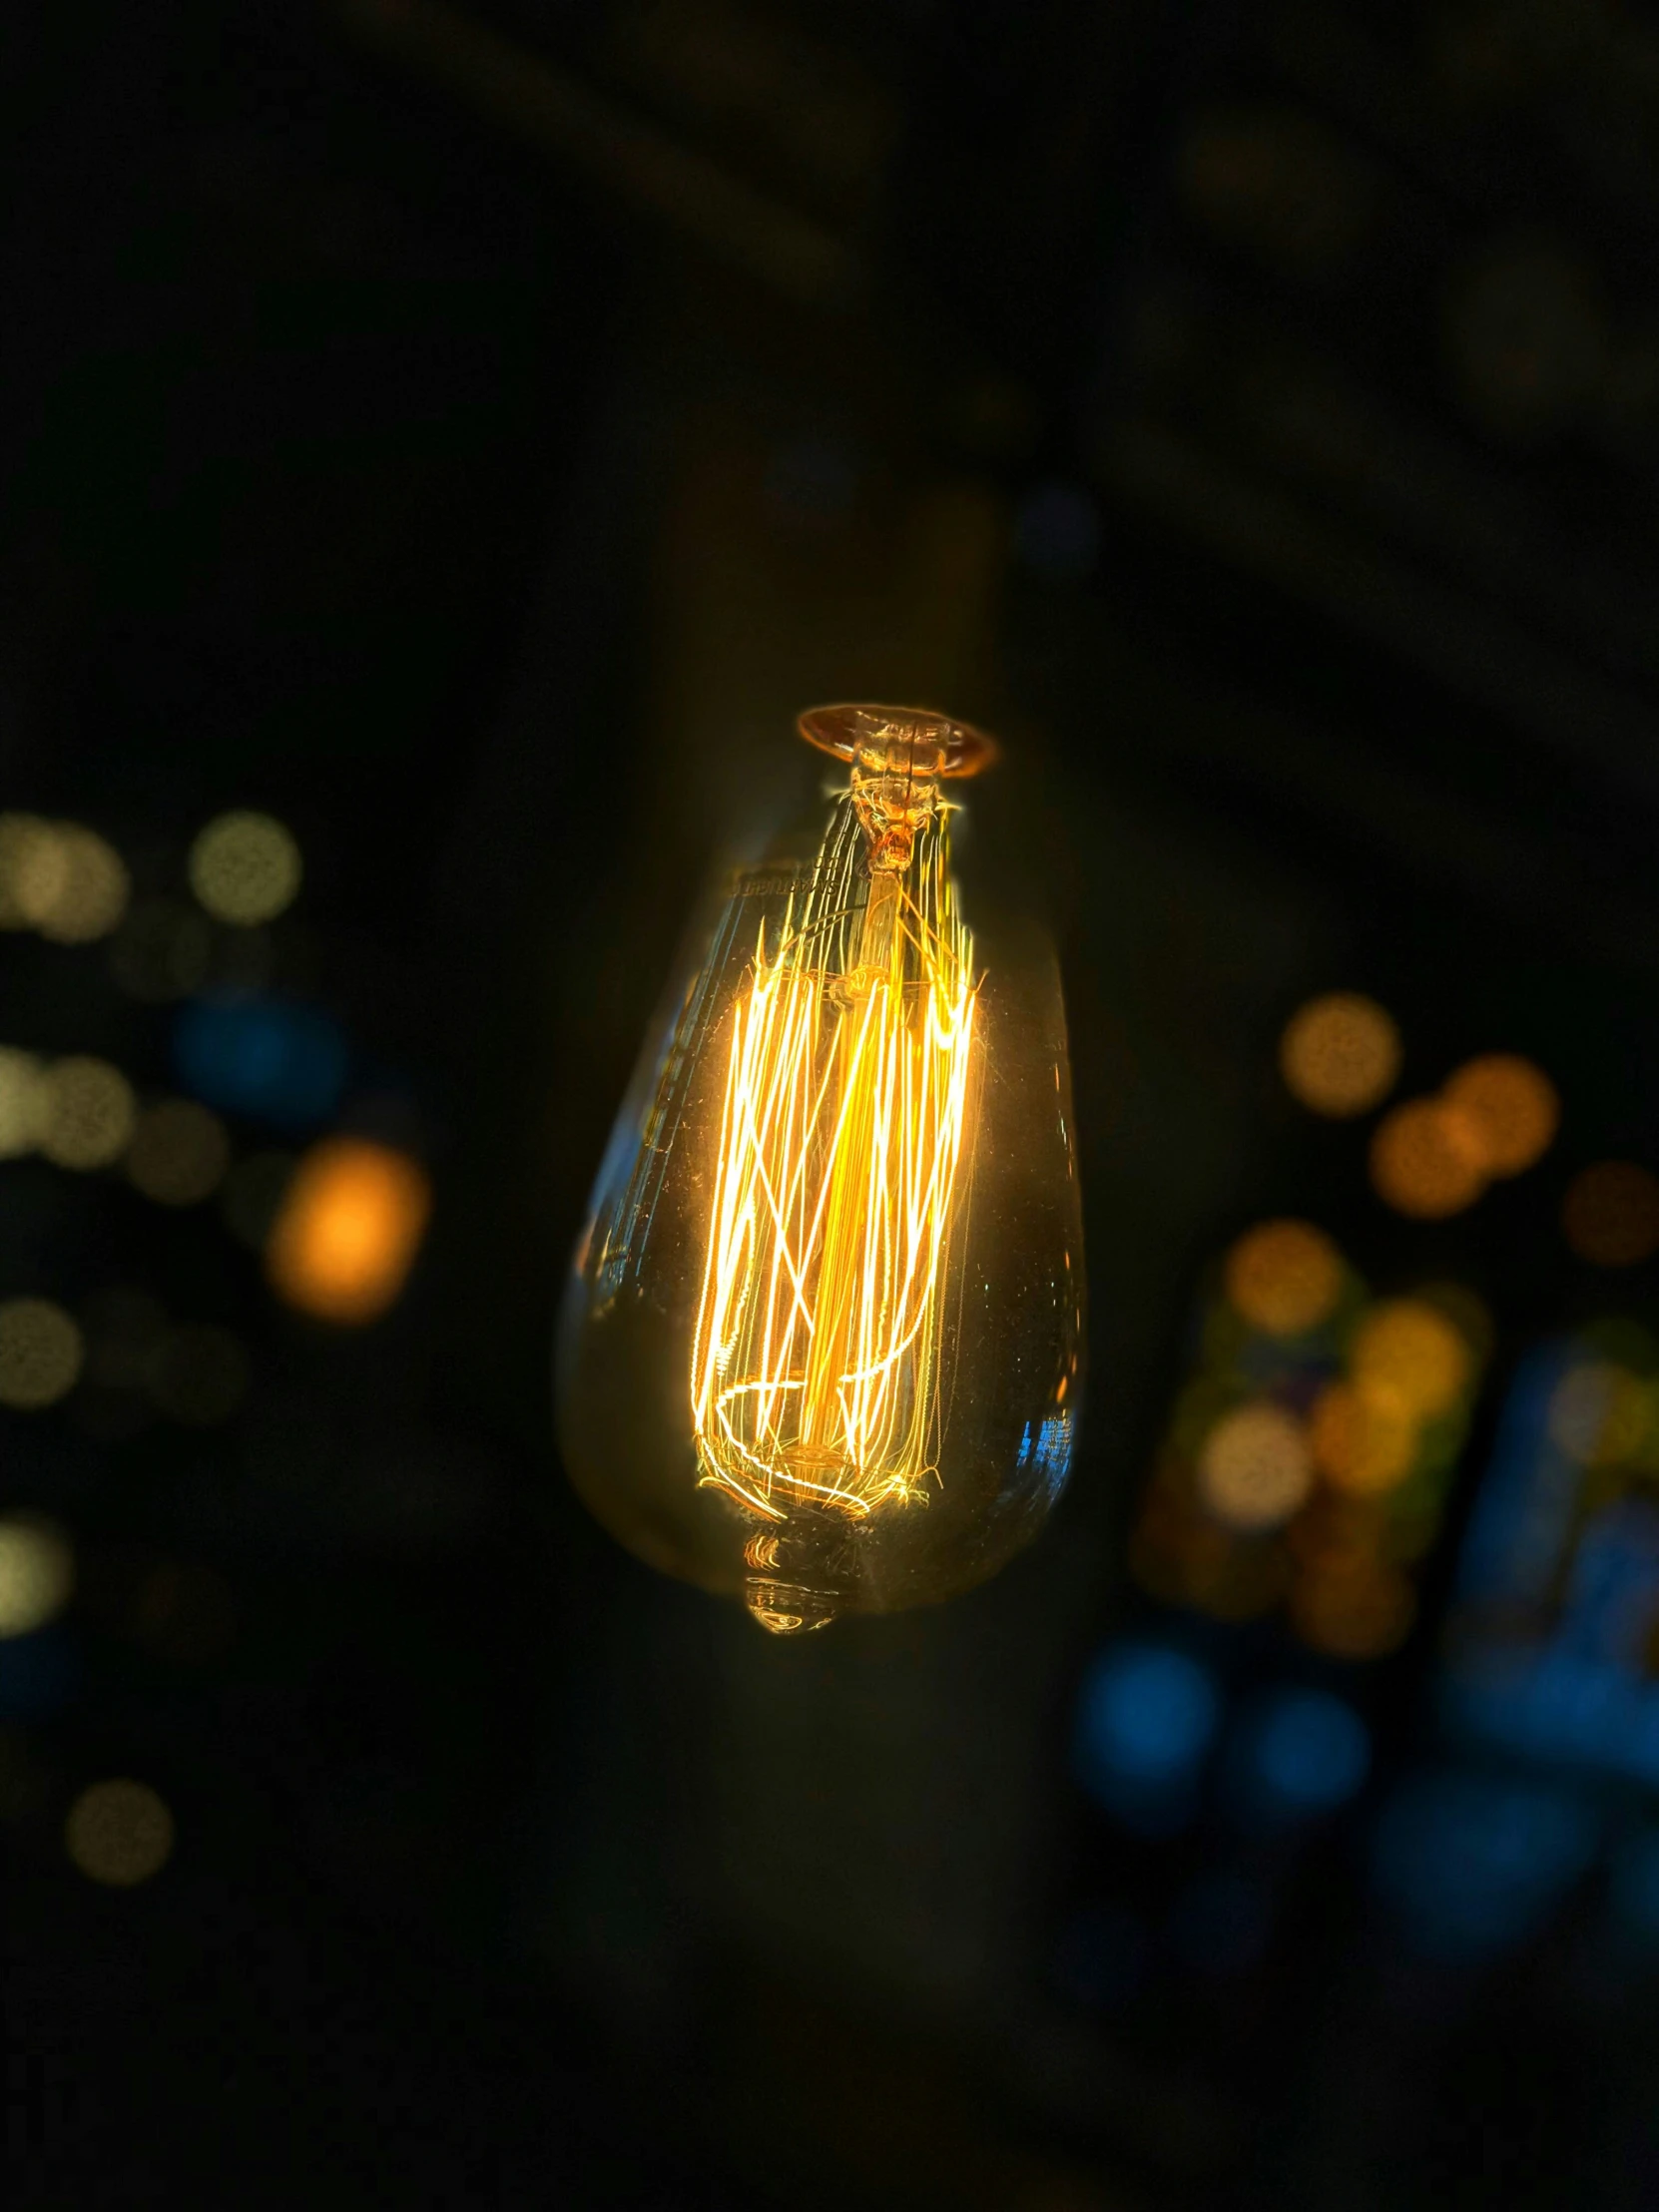 a close up of an old light bulb in the dark